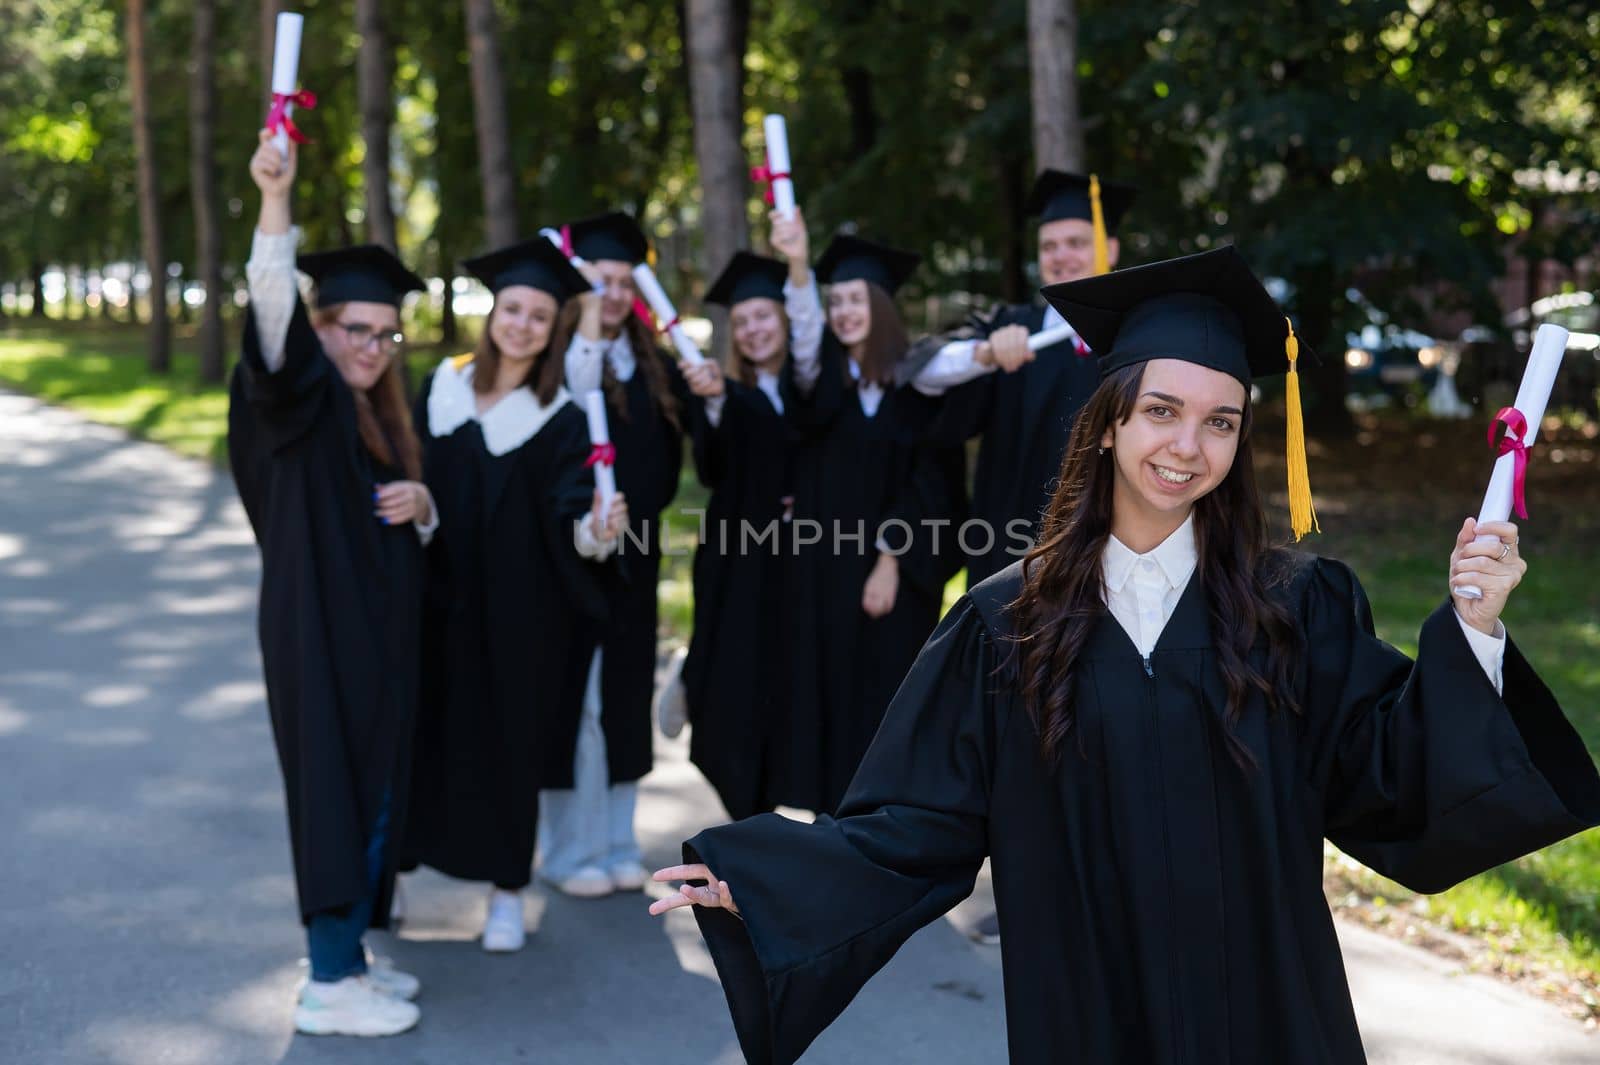 Group of happy students in graduation gowns outdoors. A young girl with a diploma in her hands in the foreground. by mrwed54